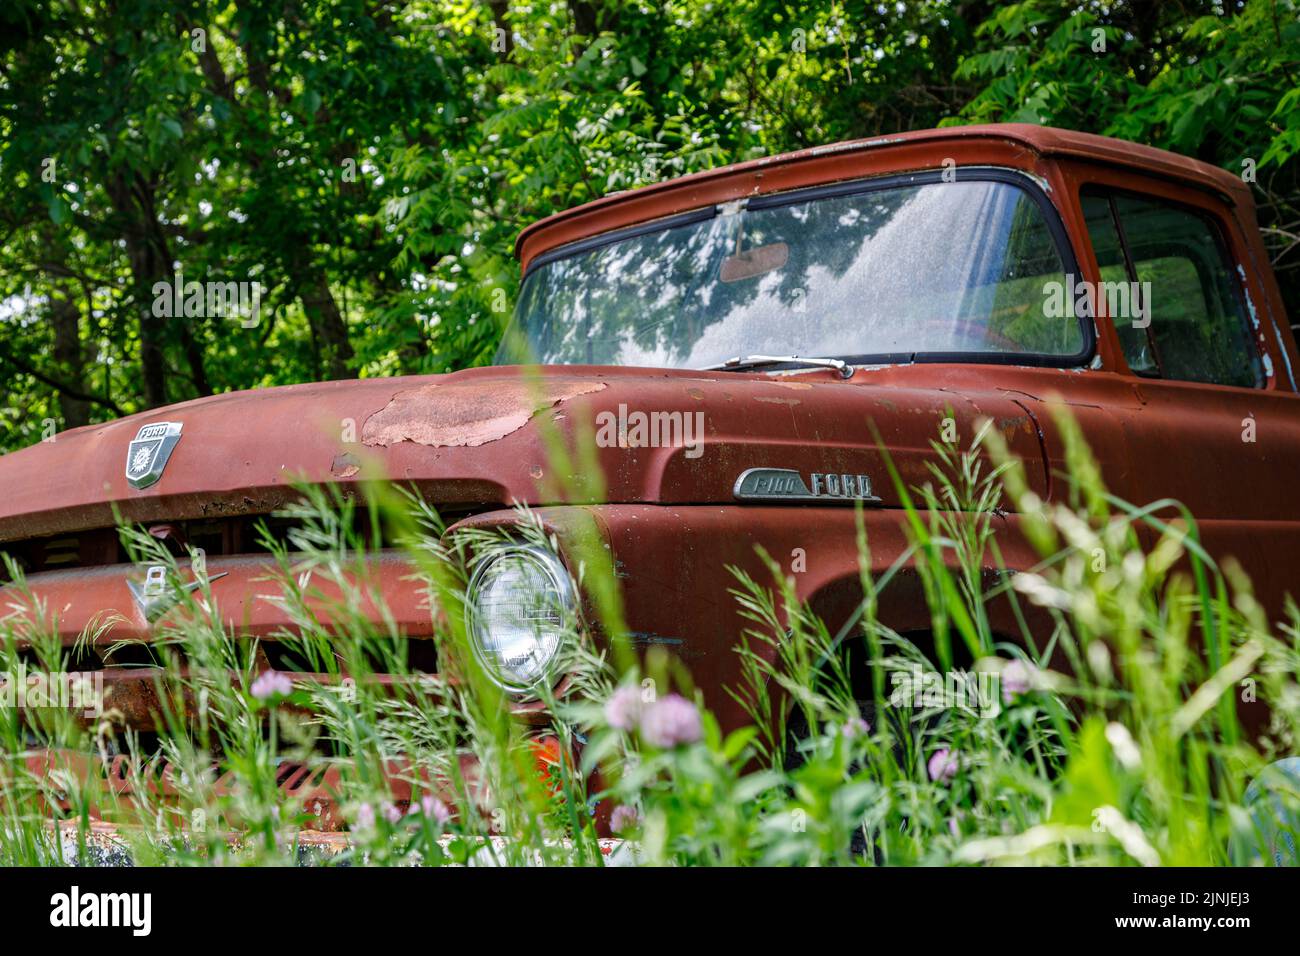 A view of an old ford truck among the plants in the forest Stock Photo